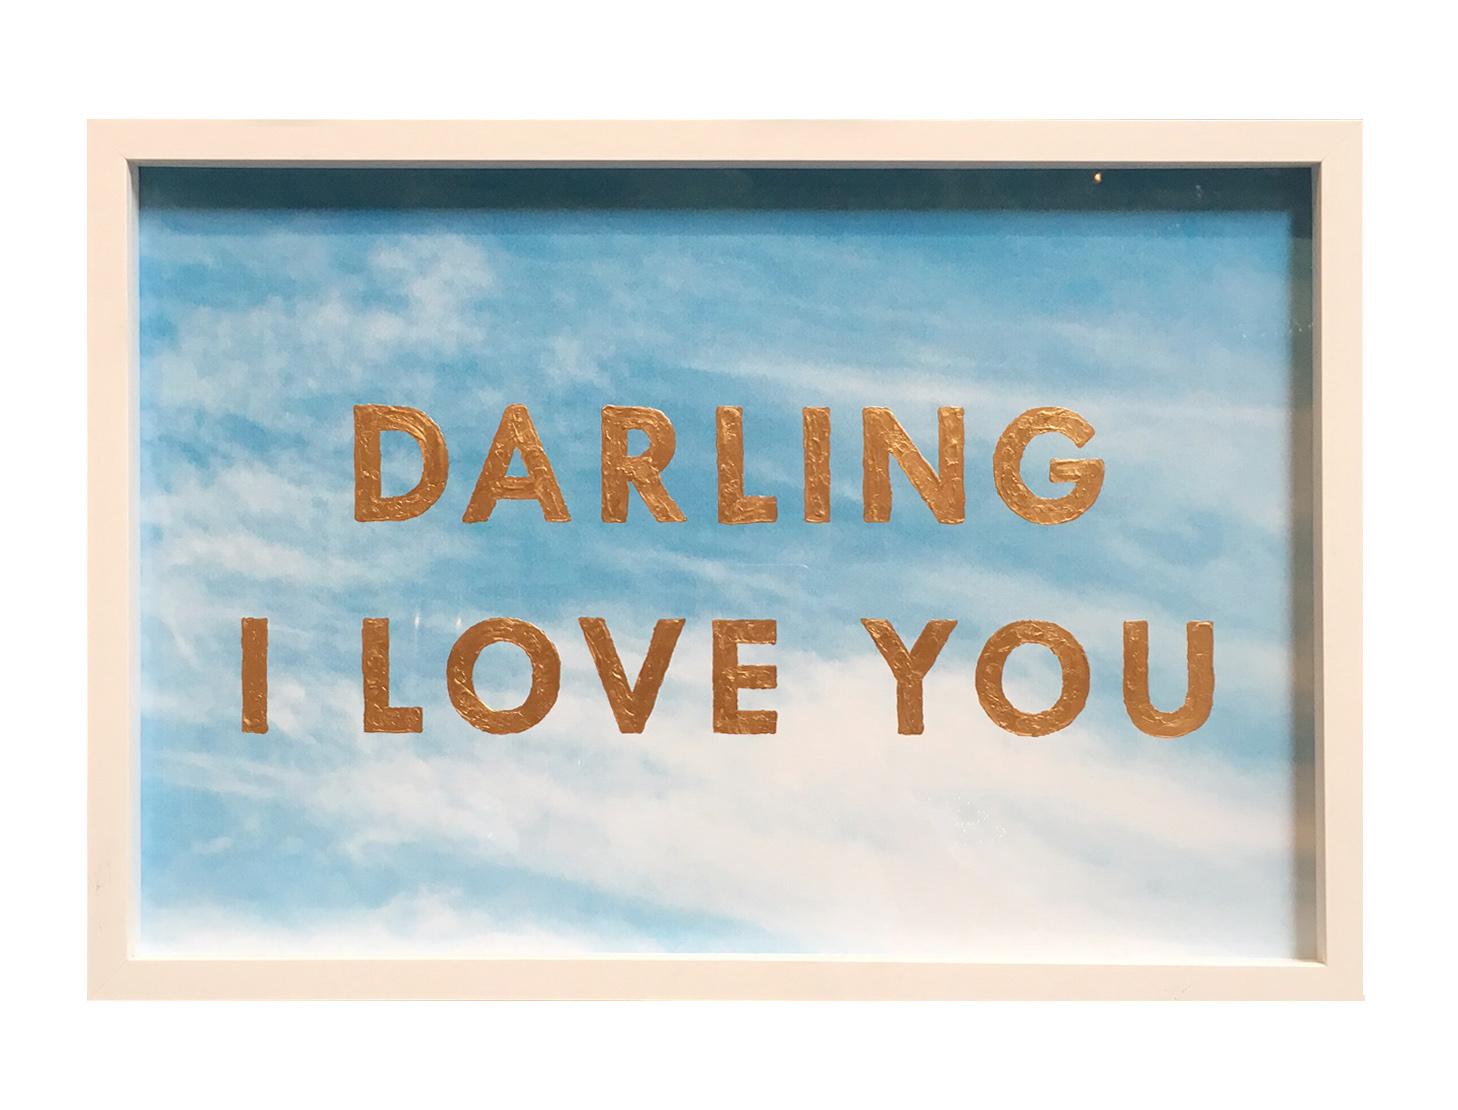 "Darling I Love You", text, quote, painting, c-print photograph, gold, blue sky